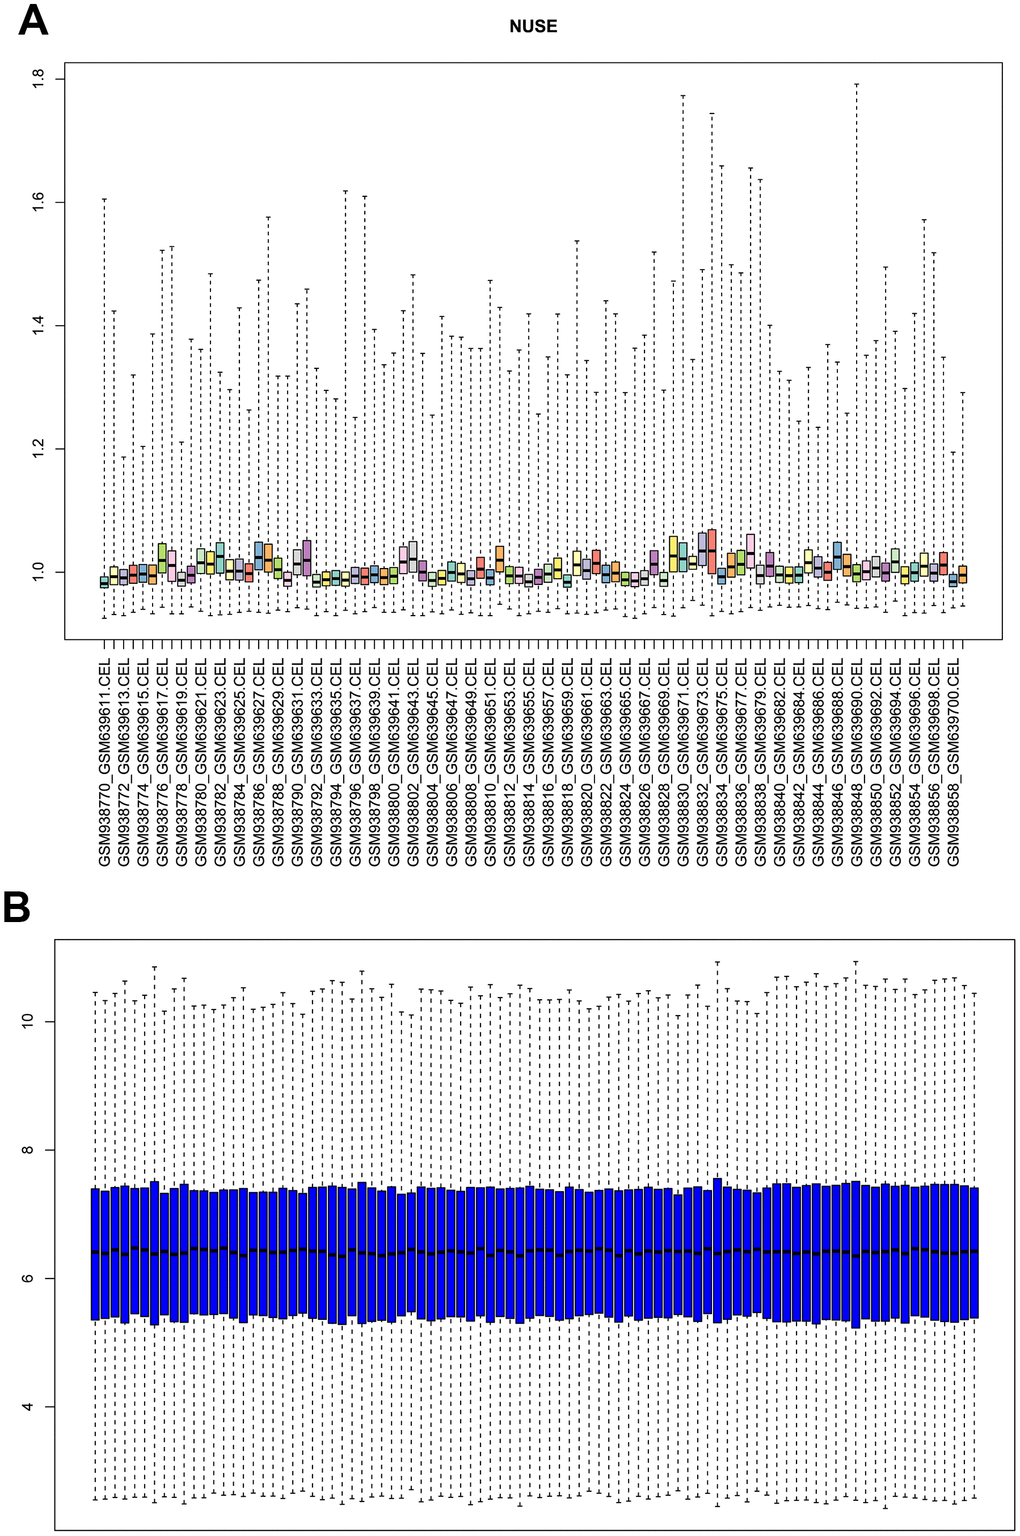 (A) Normalized unscaled standard error (NUSE) plot of GSE26049 for quality control. (B) box plot of gene expression level in GSE26049 after RMA background correction and normalization.